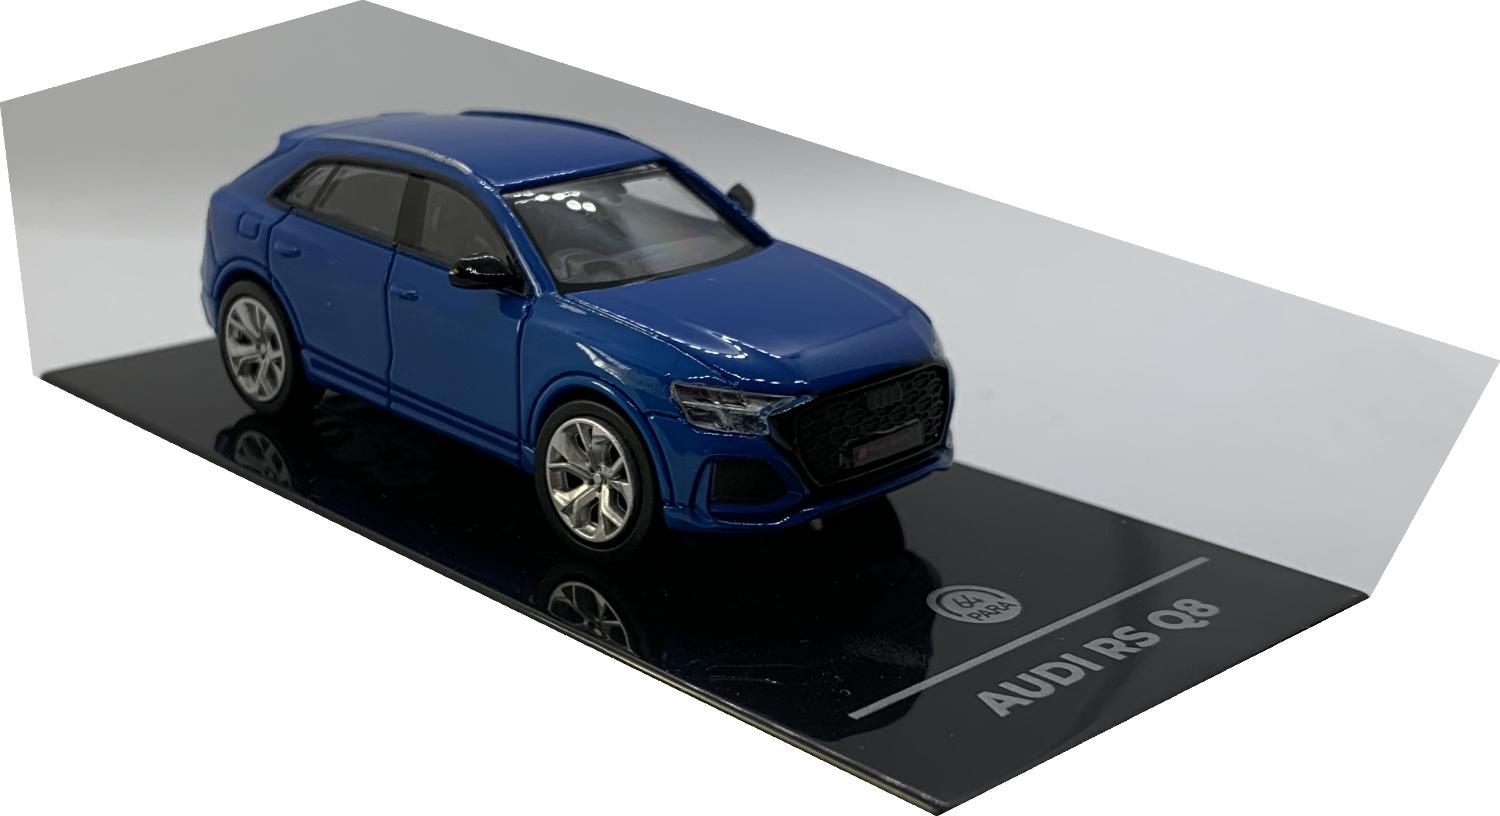 Audi RS Q8 in turbo blue 1:64 scale model from Paragon Models